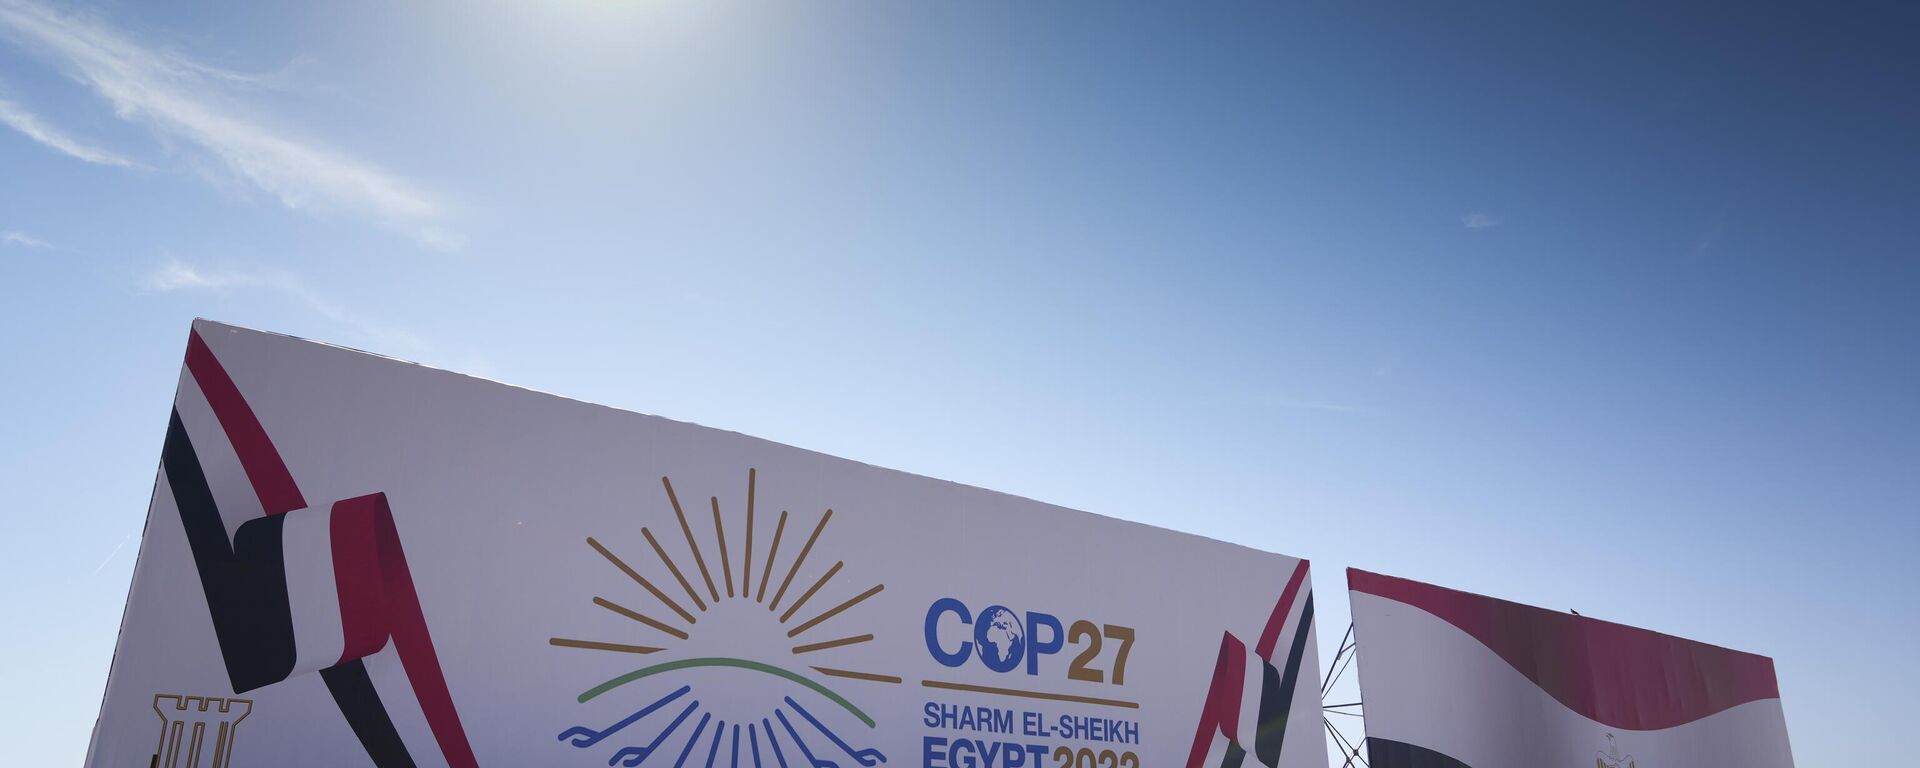 The COP27 U.N. Climate Summit logo and the Egyptian flag are displayed on a billboard lining a newly constructed highway in Sharm el-Sheikh, Egypt, Saturday, Nov. 5, 2022. The city will host the COP27 U.N. Climate Summit starting on Nov. 6, and scheduled to end on Nov. 18. - Sputnik International, 1920, 20.11.2022